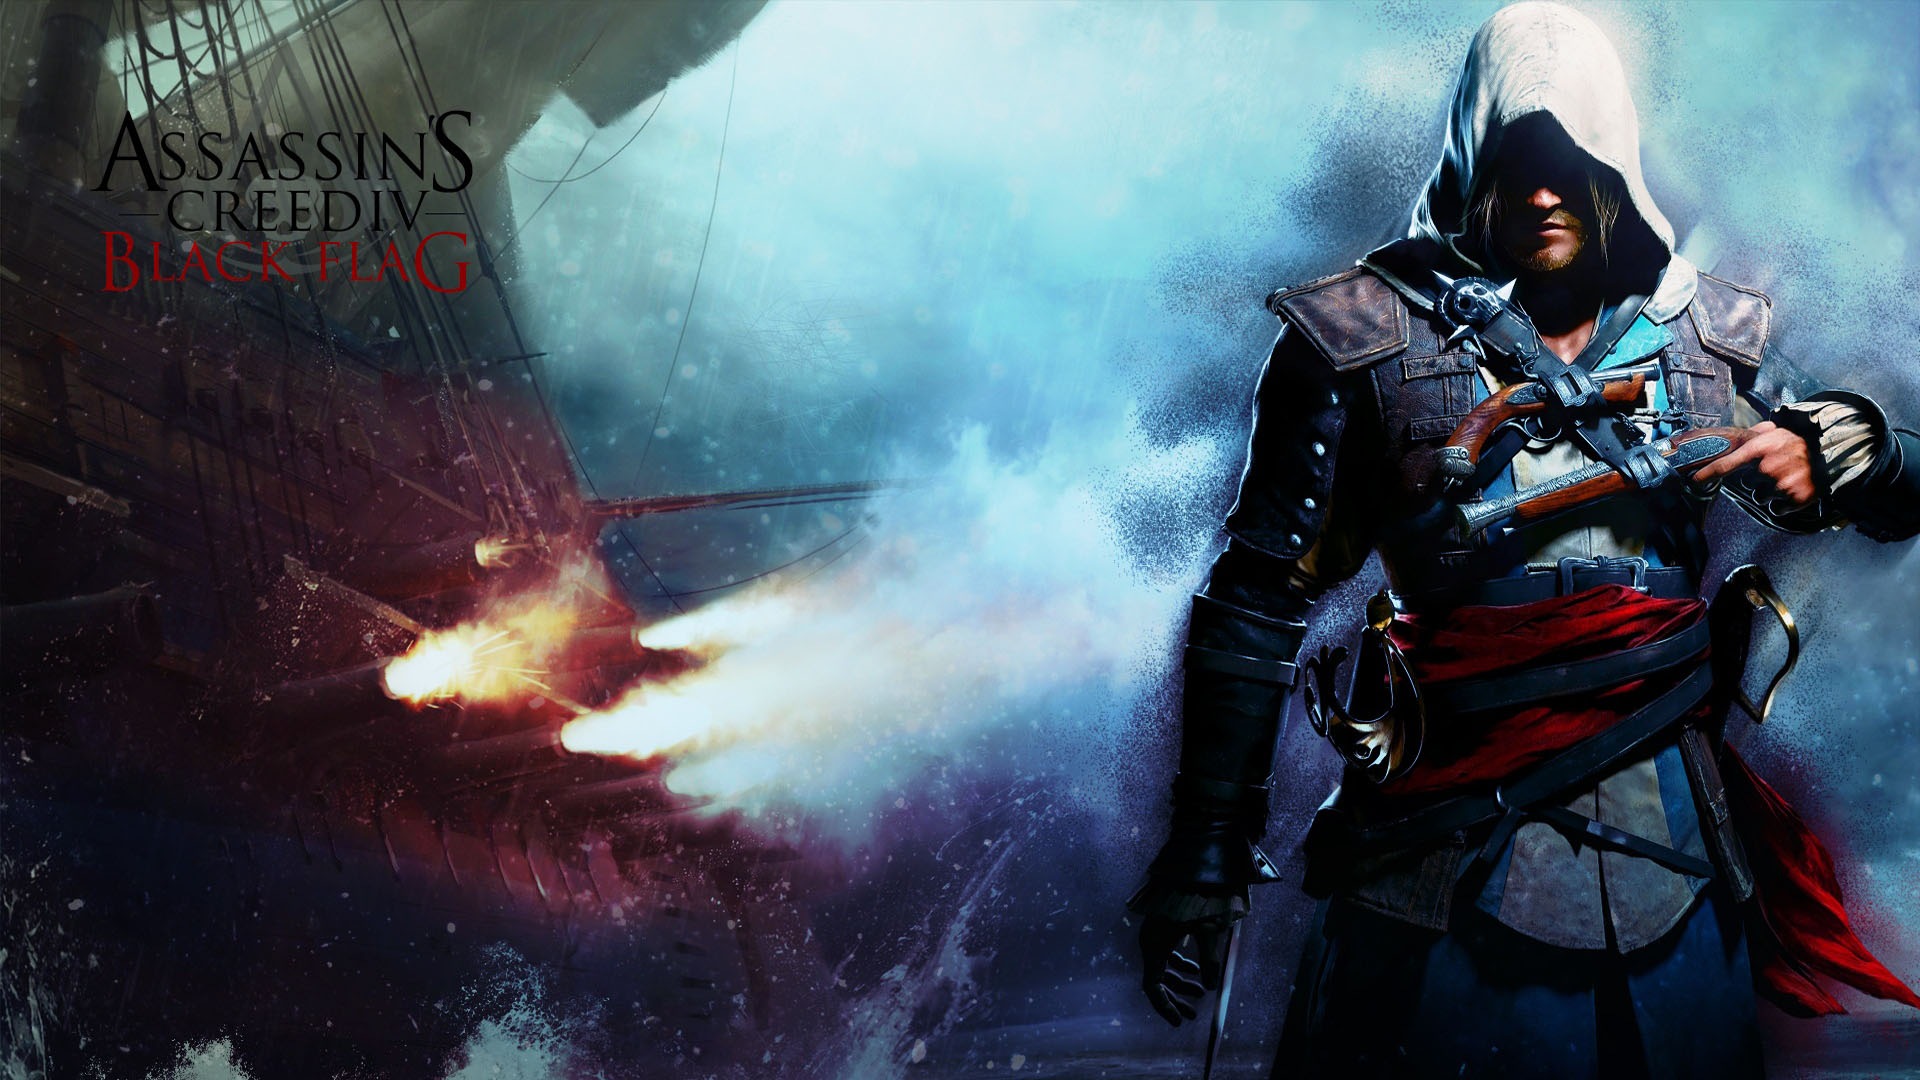 Creed IV Assassin: Black Flag HD wallpapers #2 - 1920x1080